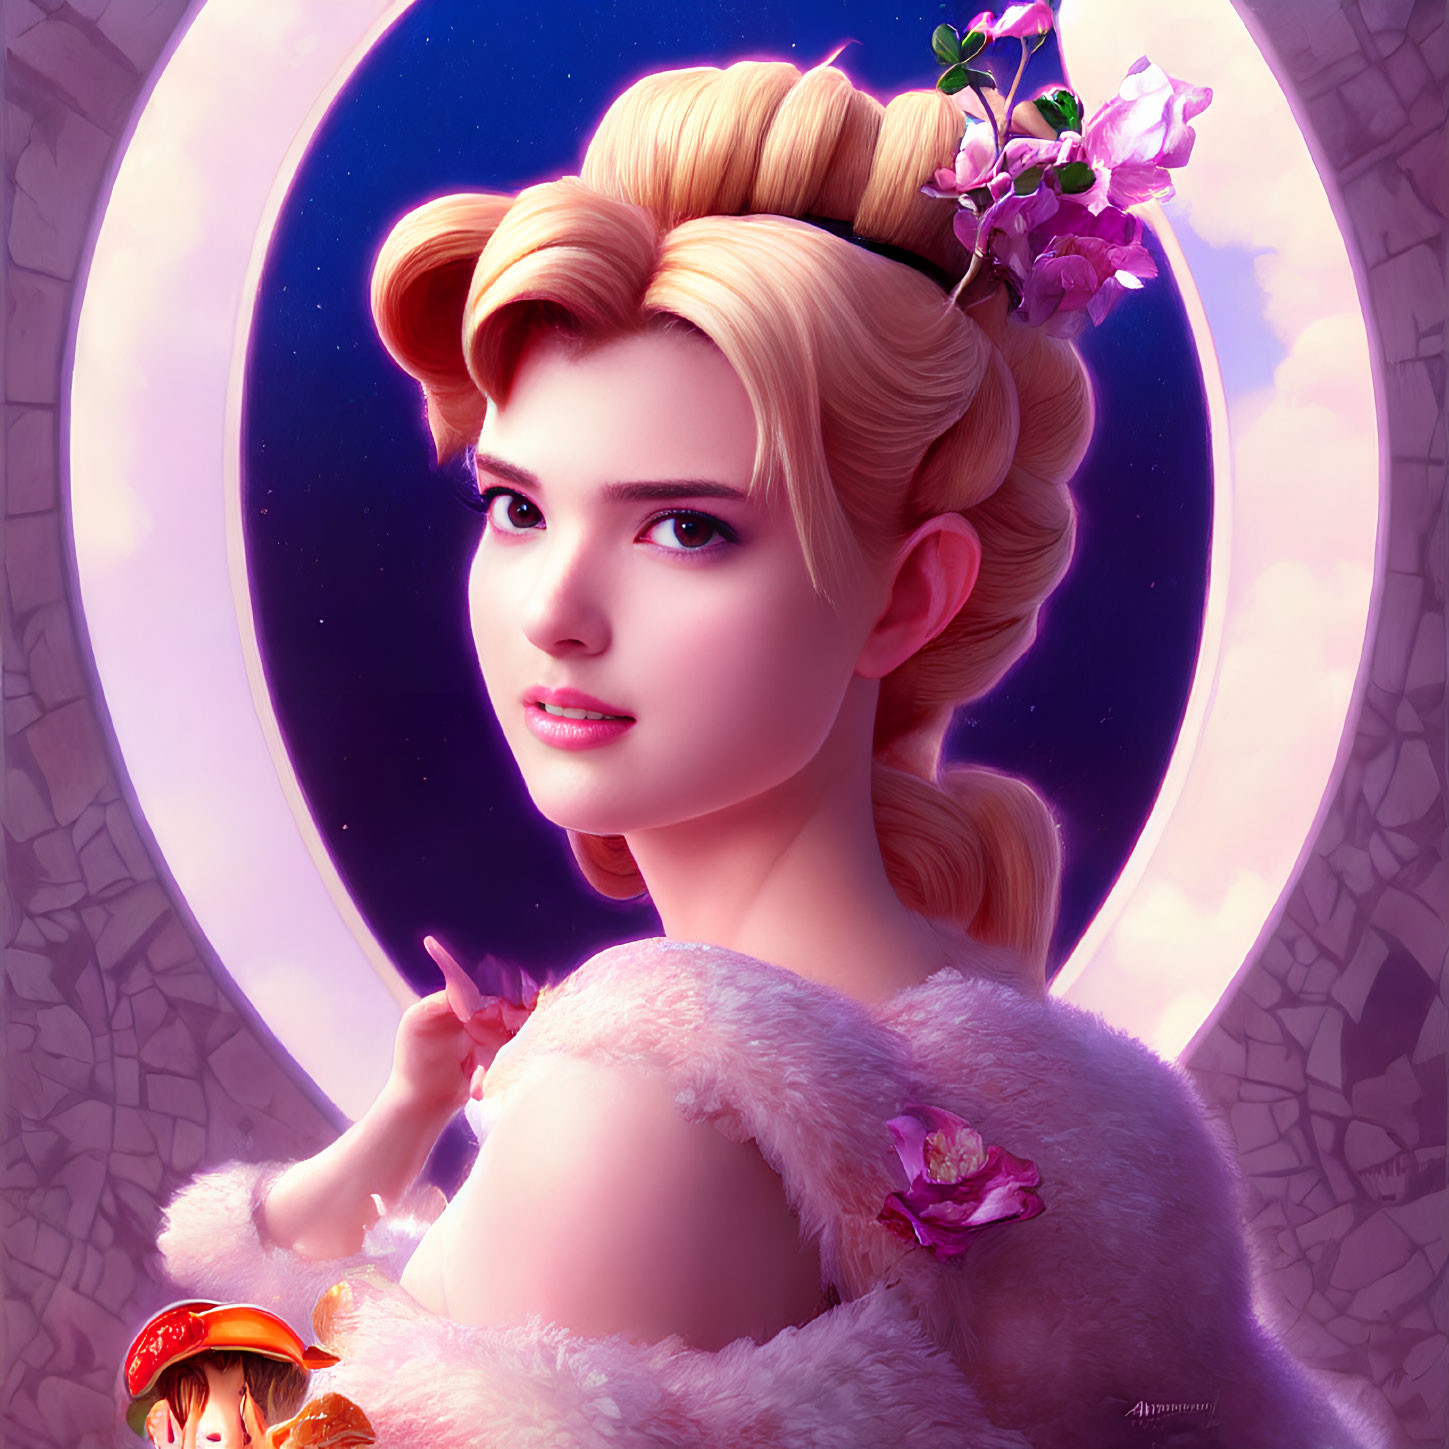 Stylized woman with elegant updo, floral hair, pink fur stole, under moonlight